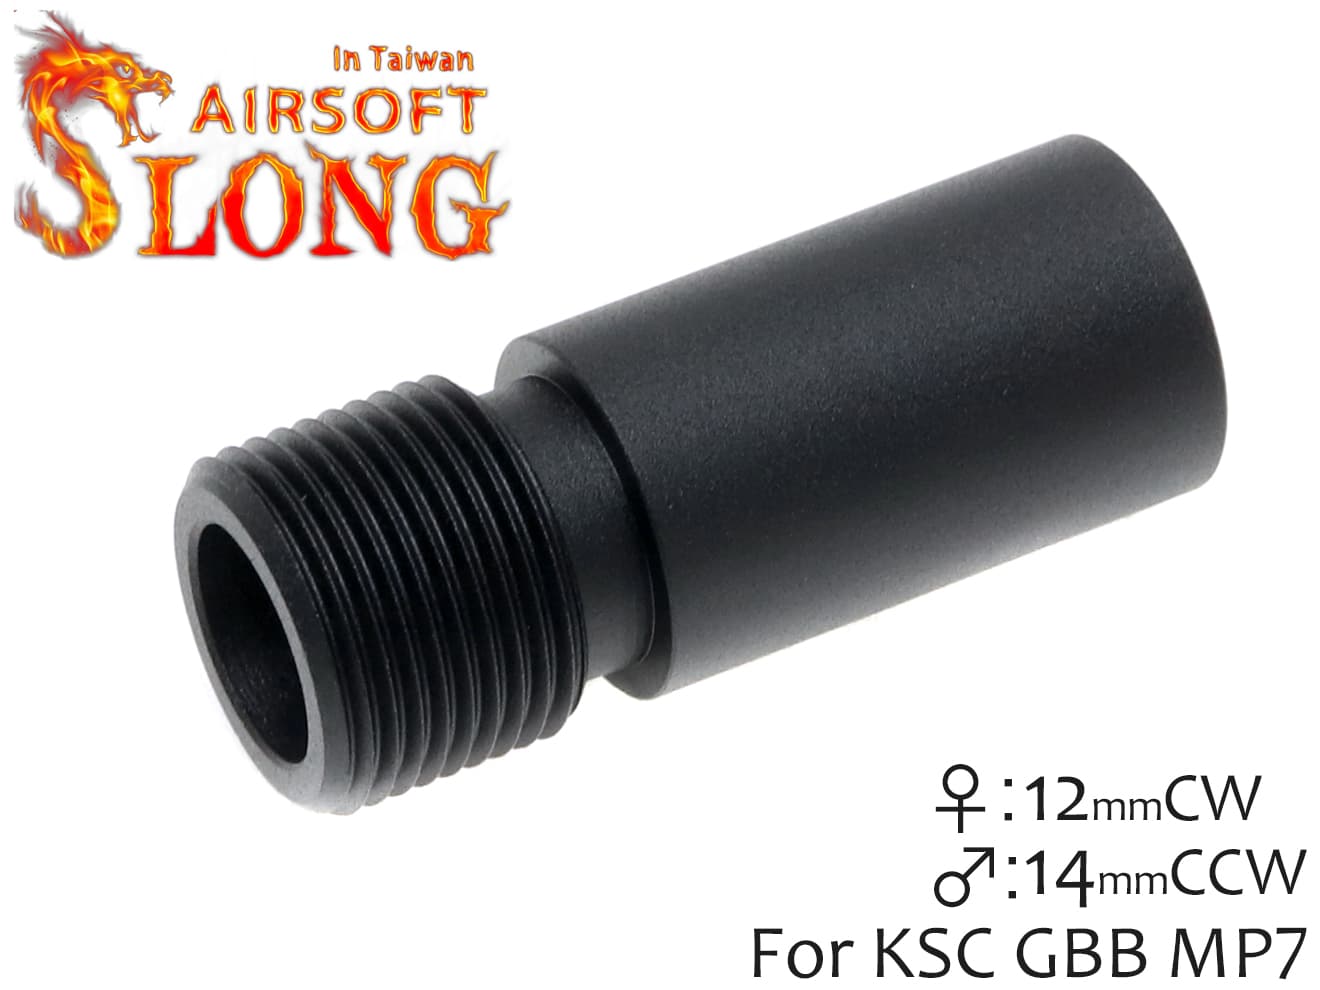 SLONG AIRSOFT アルミCNC マズルアダプター for KSC GBB MP7